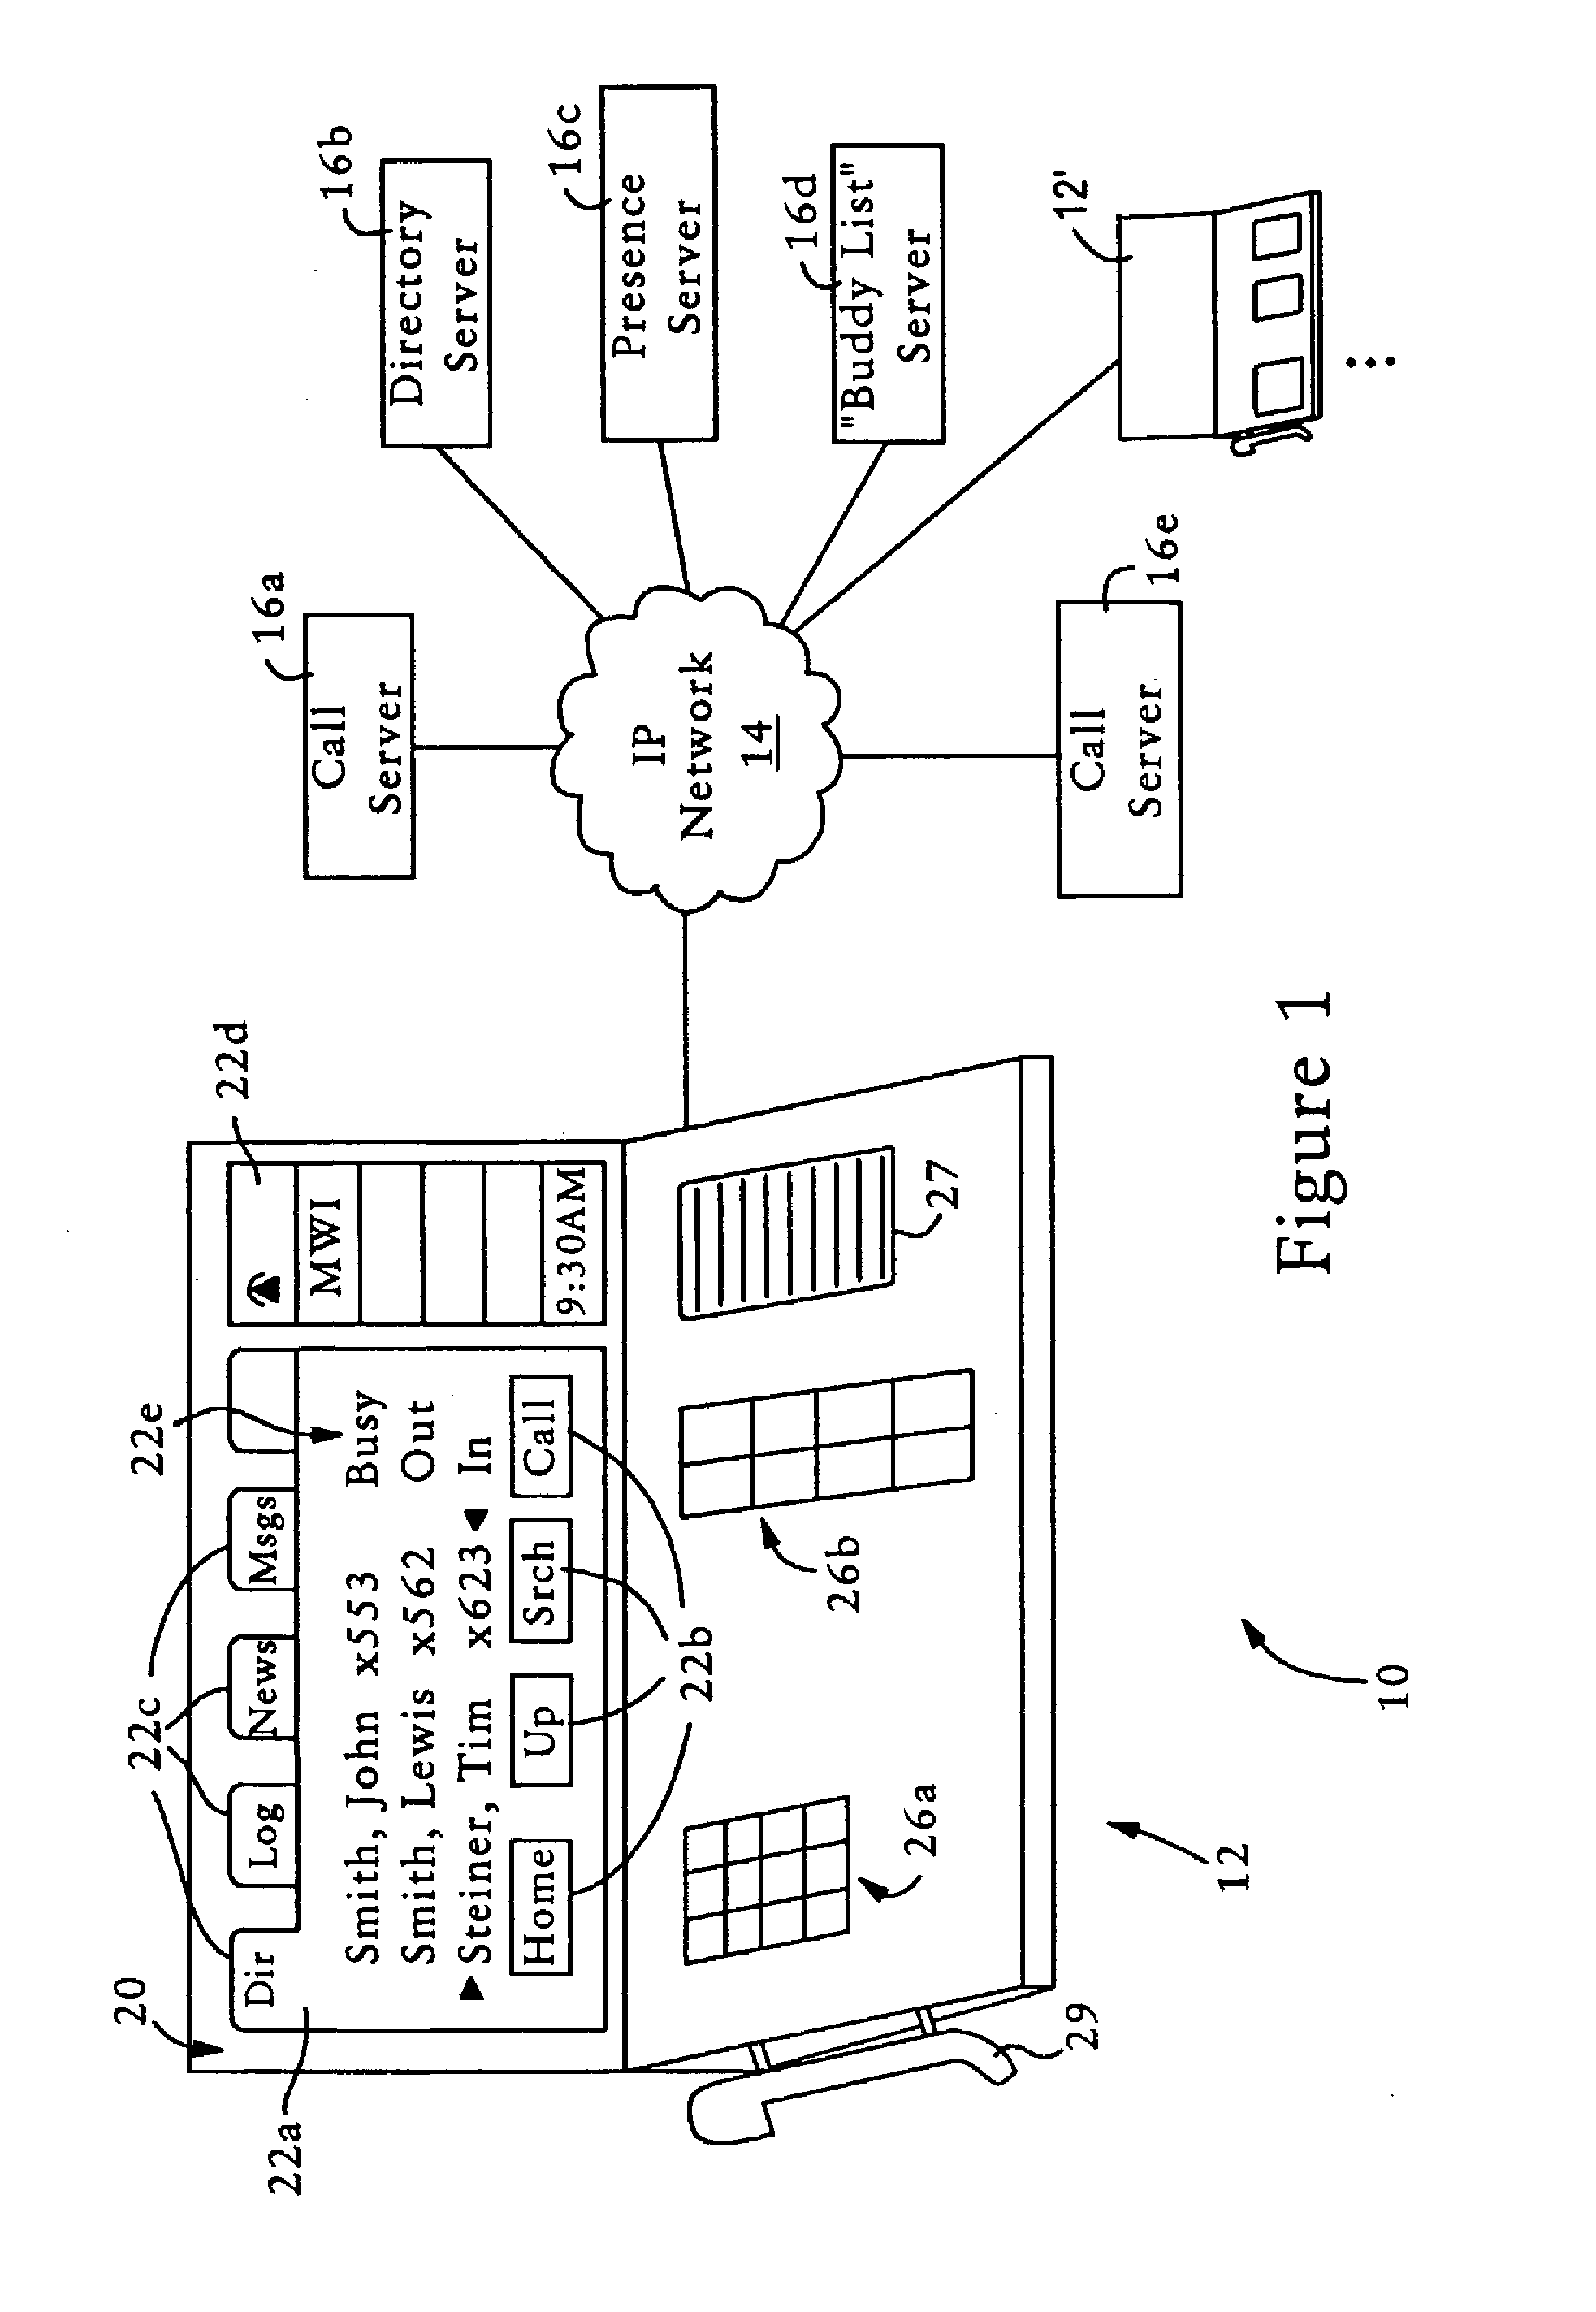 Integration of presence services with a network enabled telephony device